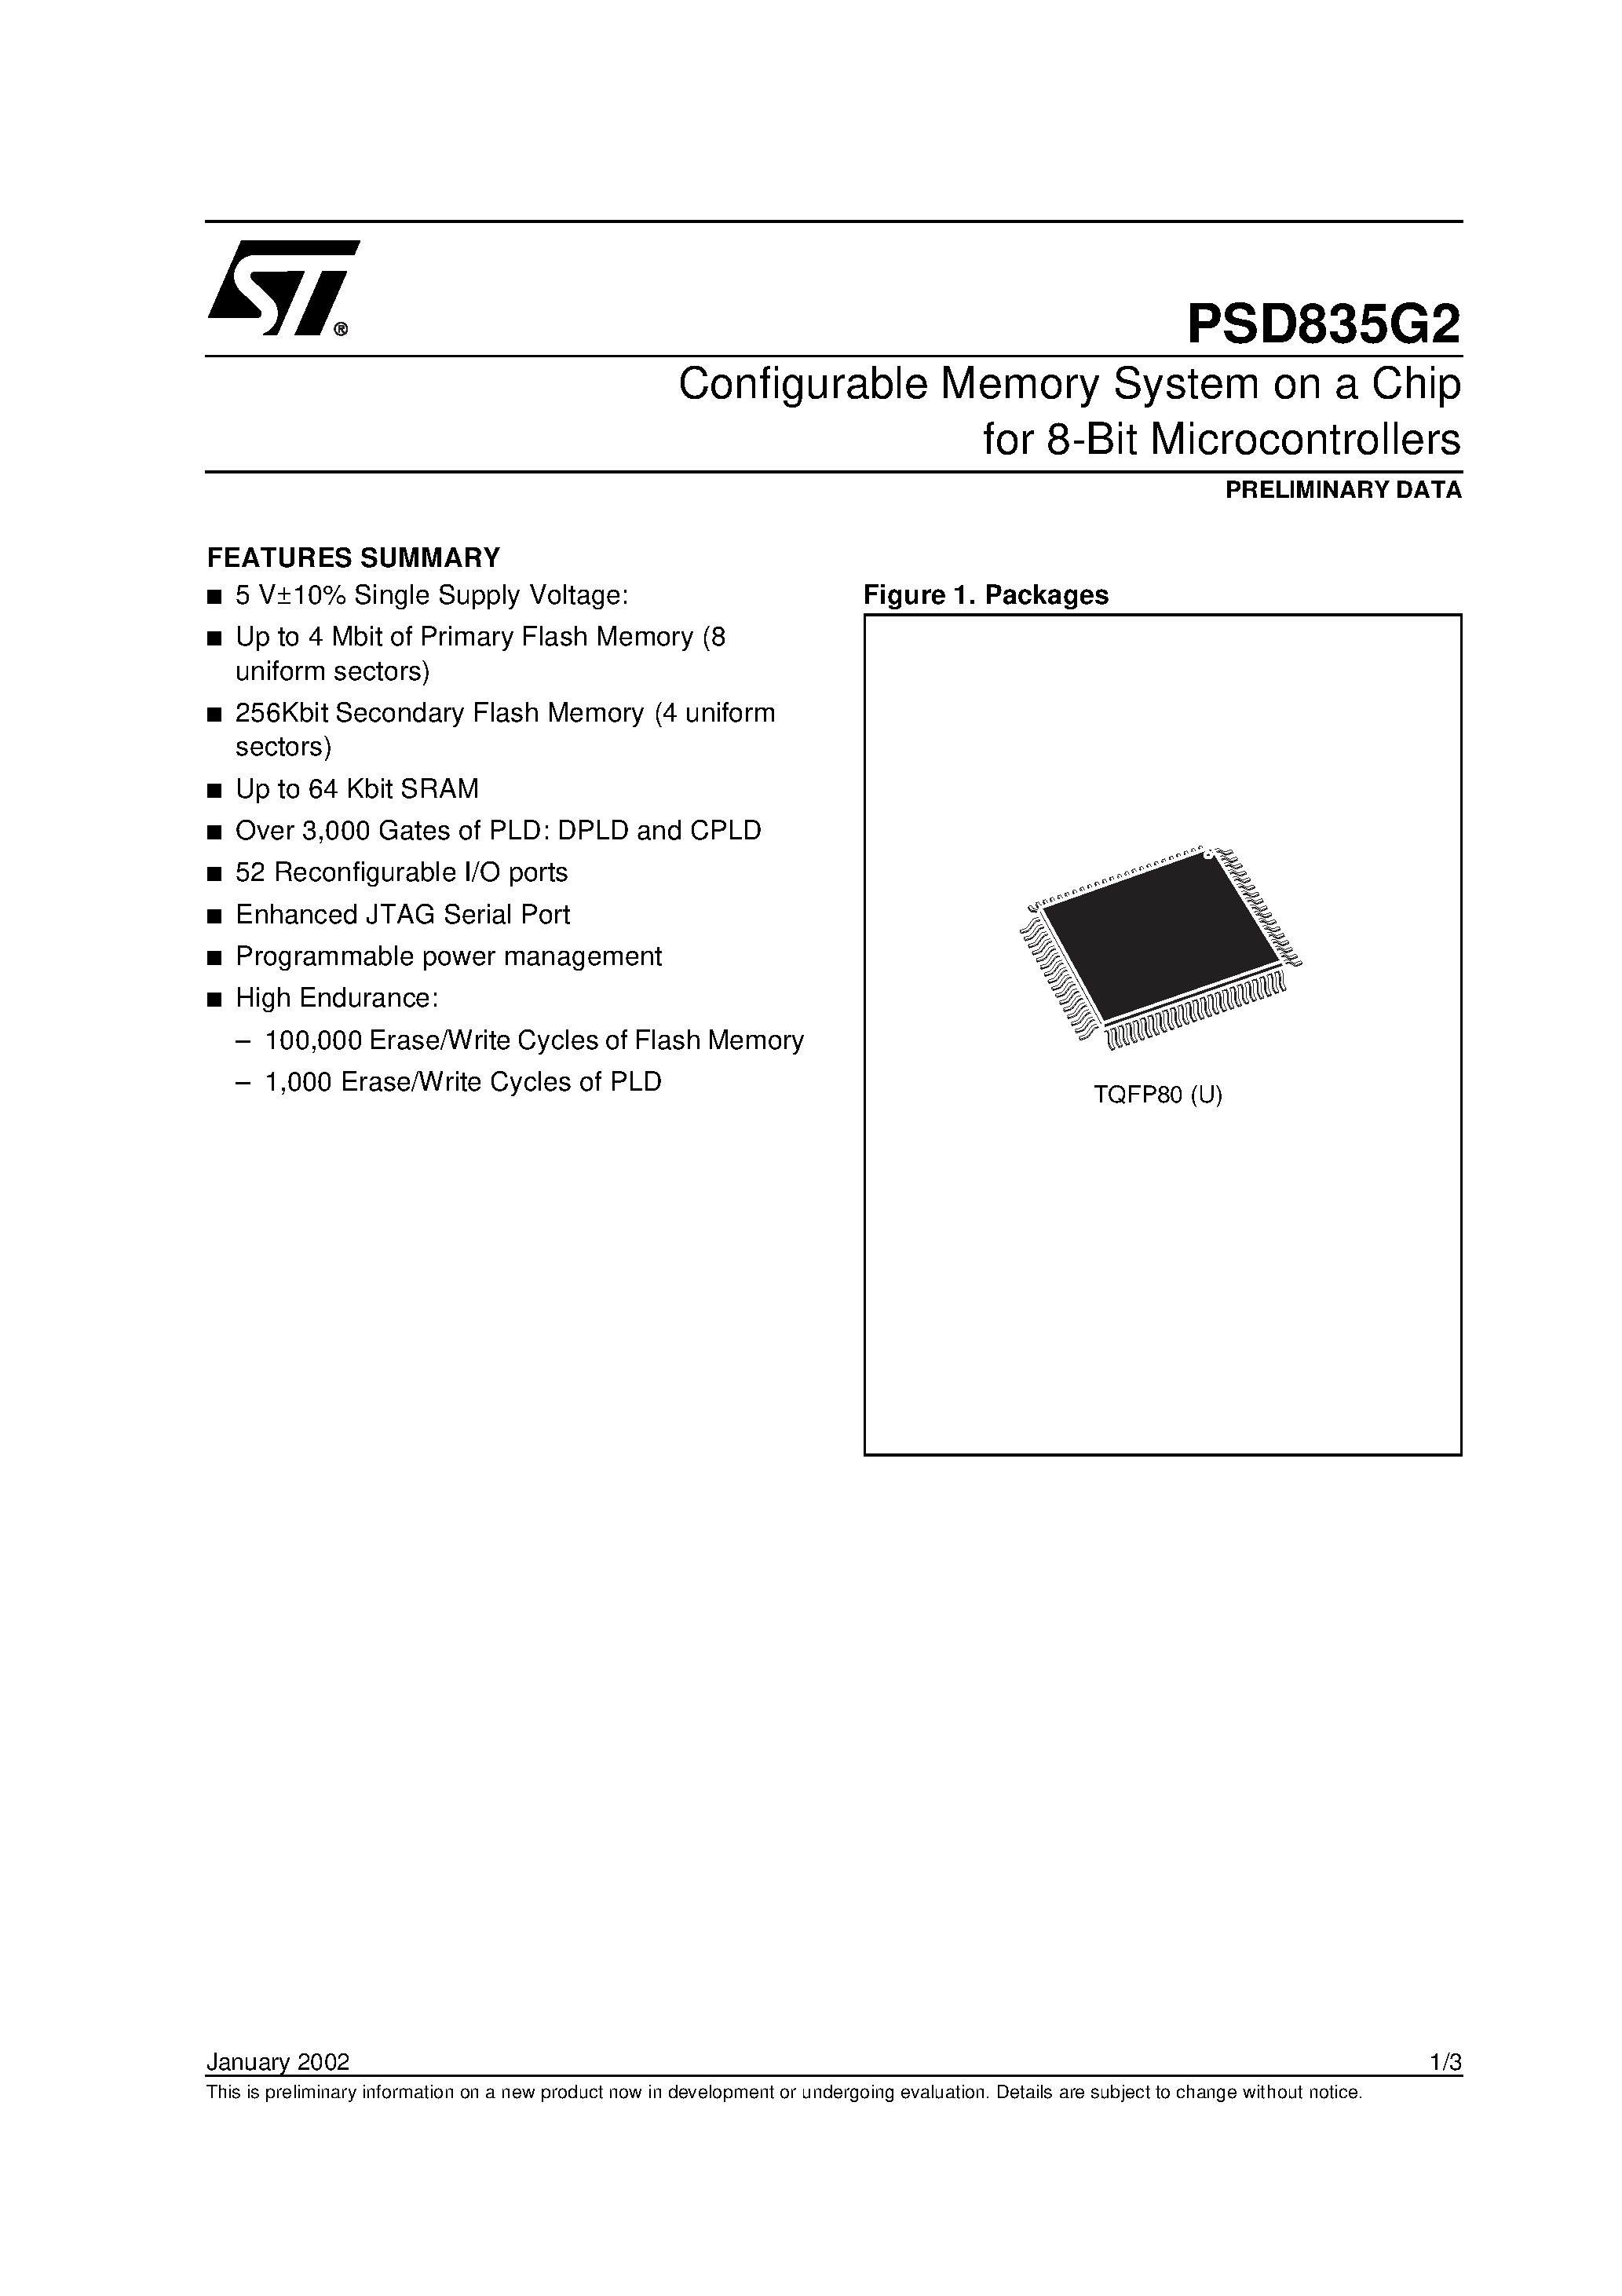 Datasheet PSD835F2V-A-70J - Configurable Memory System on a Chip for 8-Bit Microcontrollers page 1